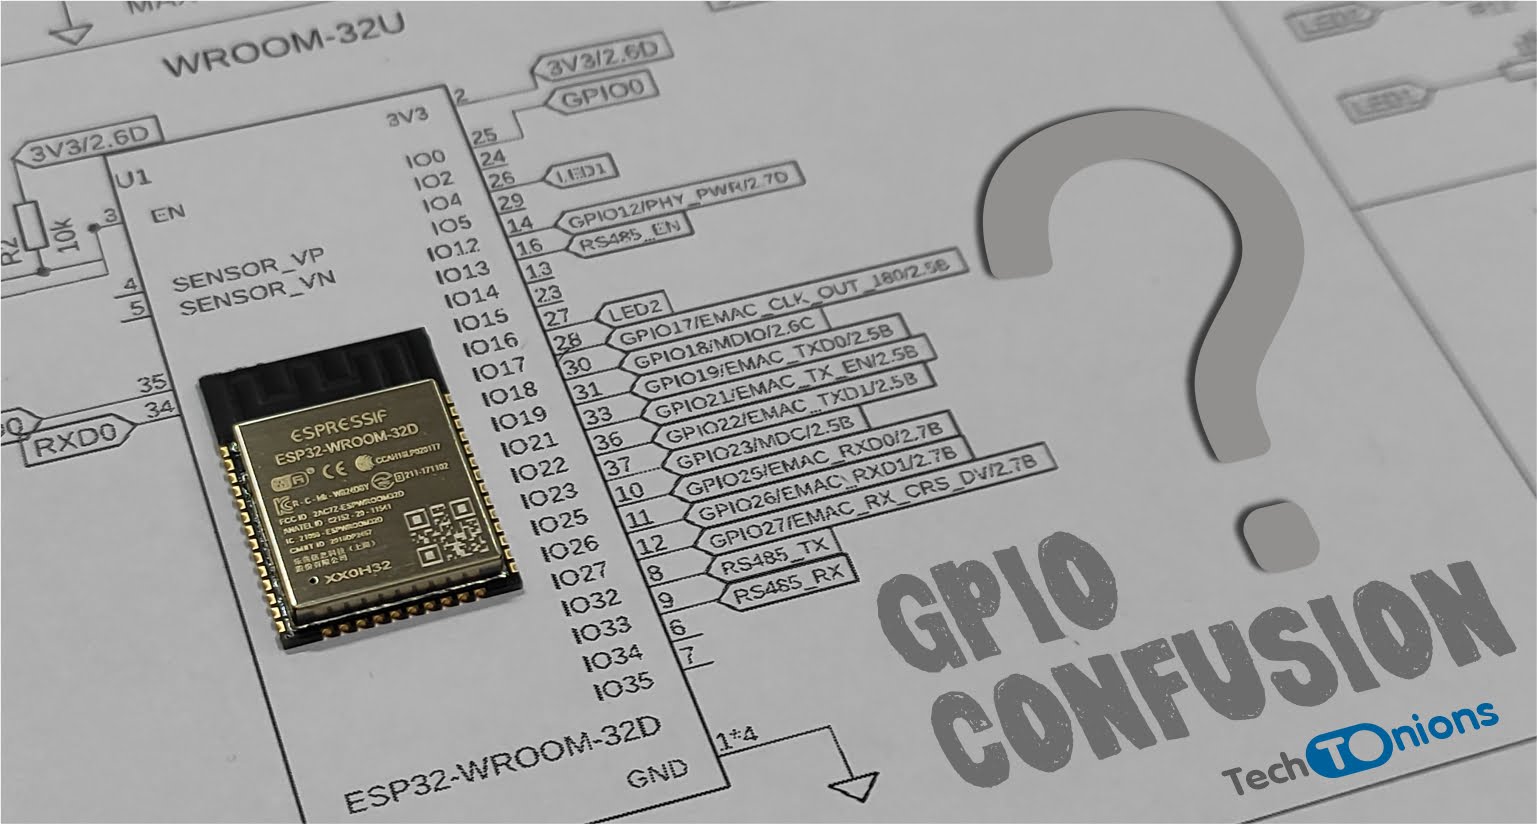 Esp32 Pinout Reference Which Gpio Pins Should You Use - Reverasite